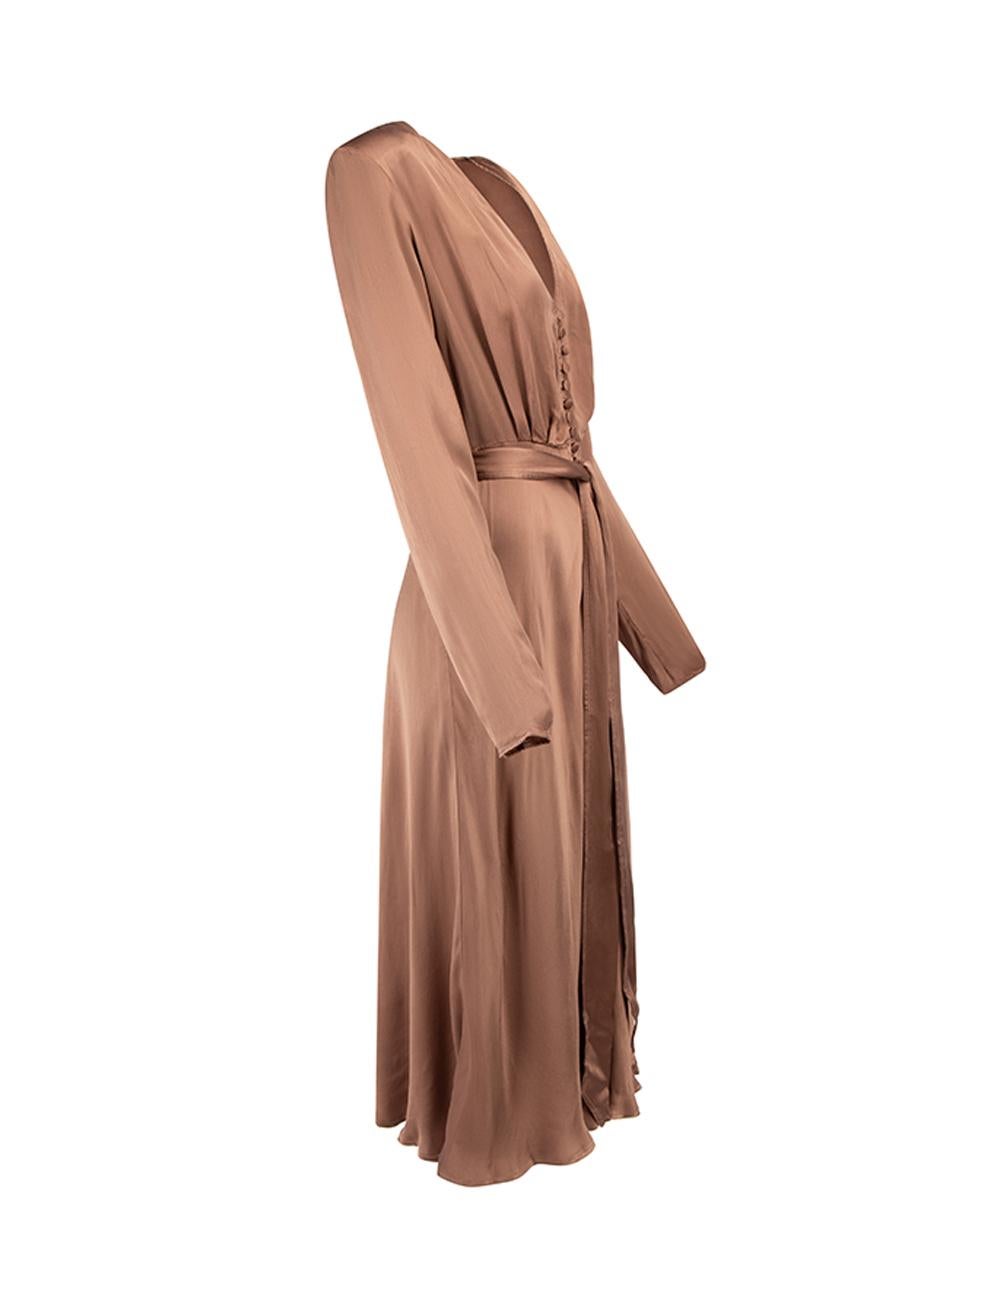 CONDITION is Very good. Minimal wear to dress is evident. There is a small stain on this used Ghost London designer resale item. This item comes with original box.



Details


Brown

Viscose

Midi dress

Long sleeves with shoulder pads

V